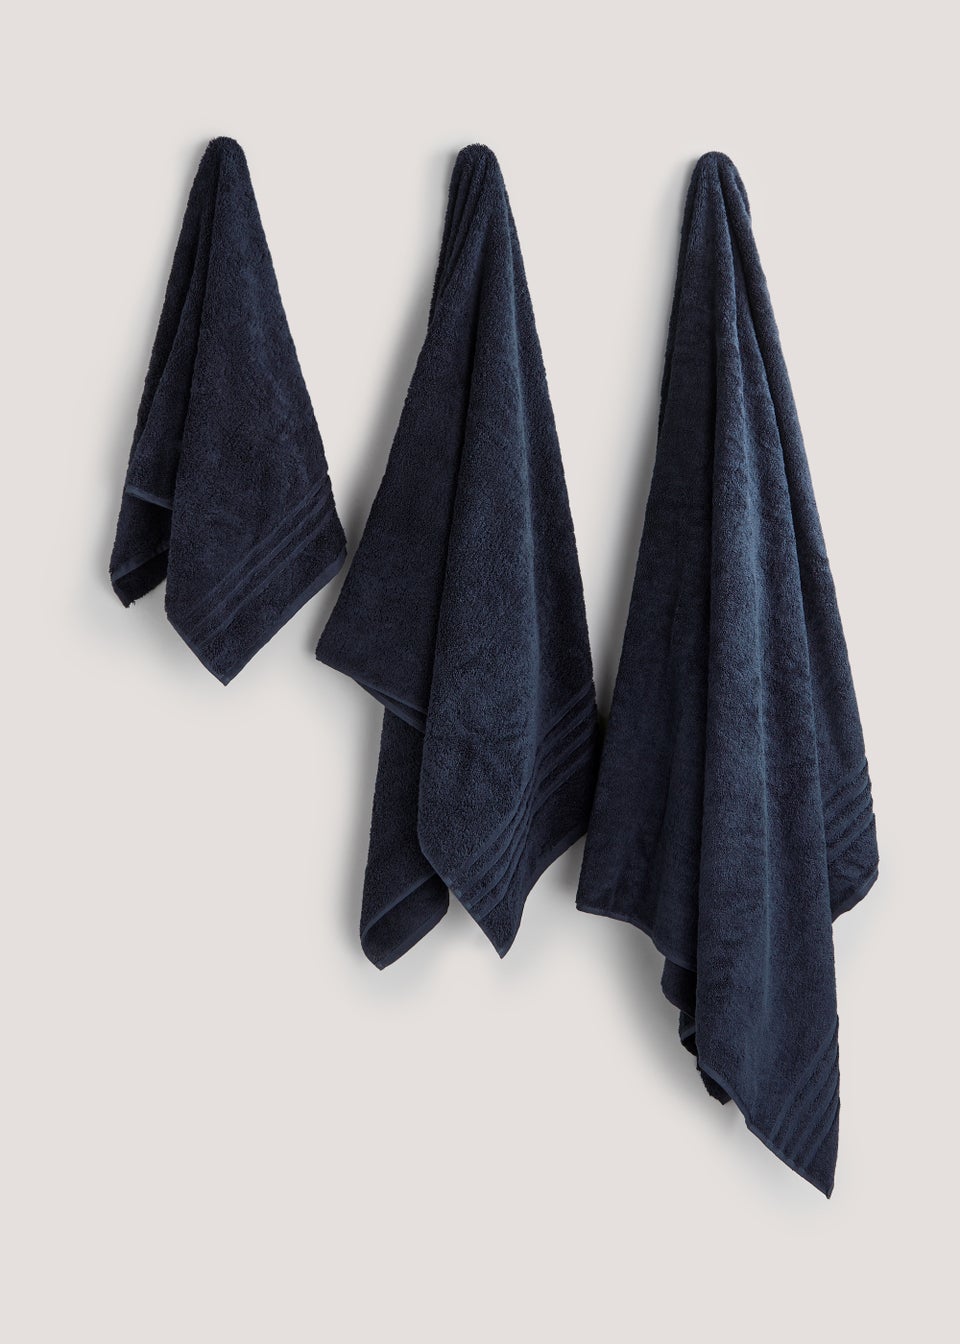 Navy 100% Egyptian Cotton Towels